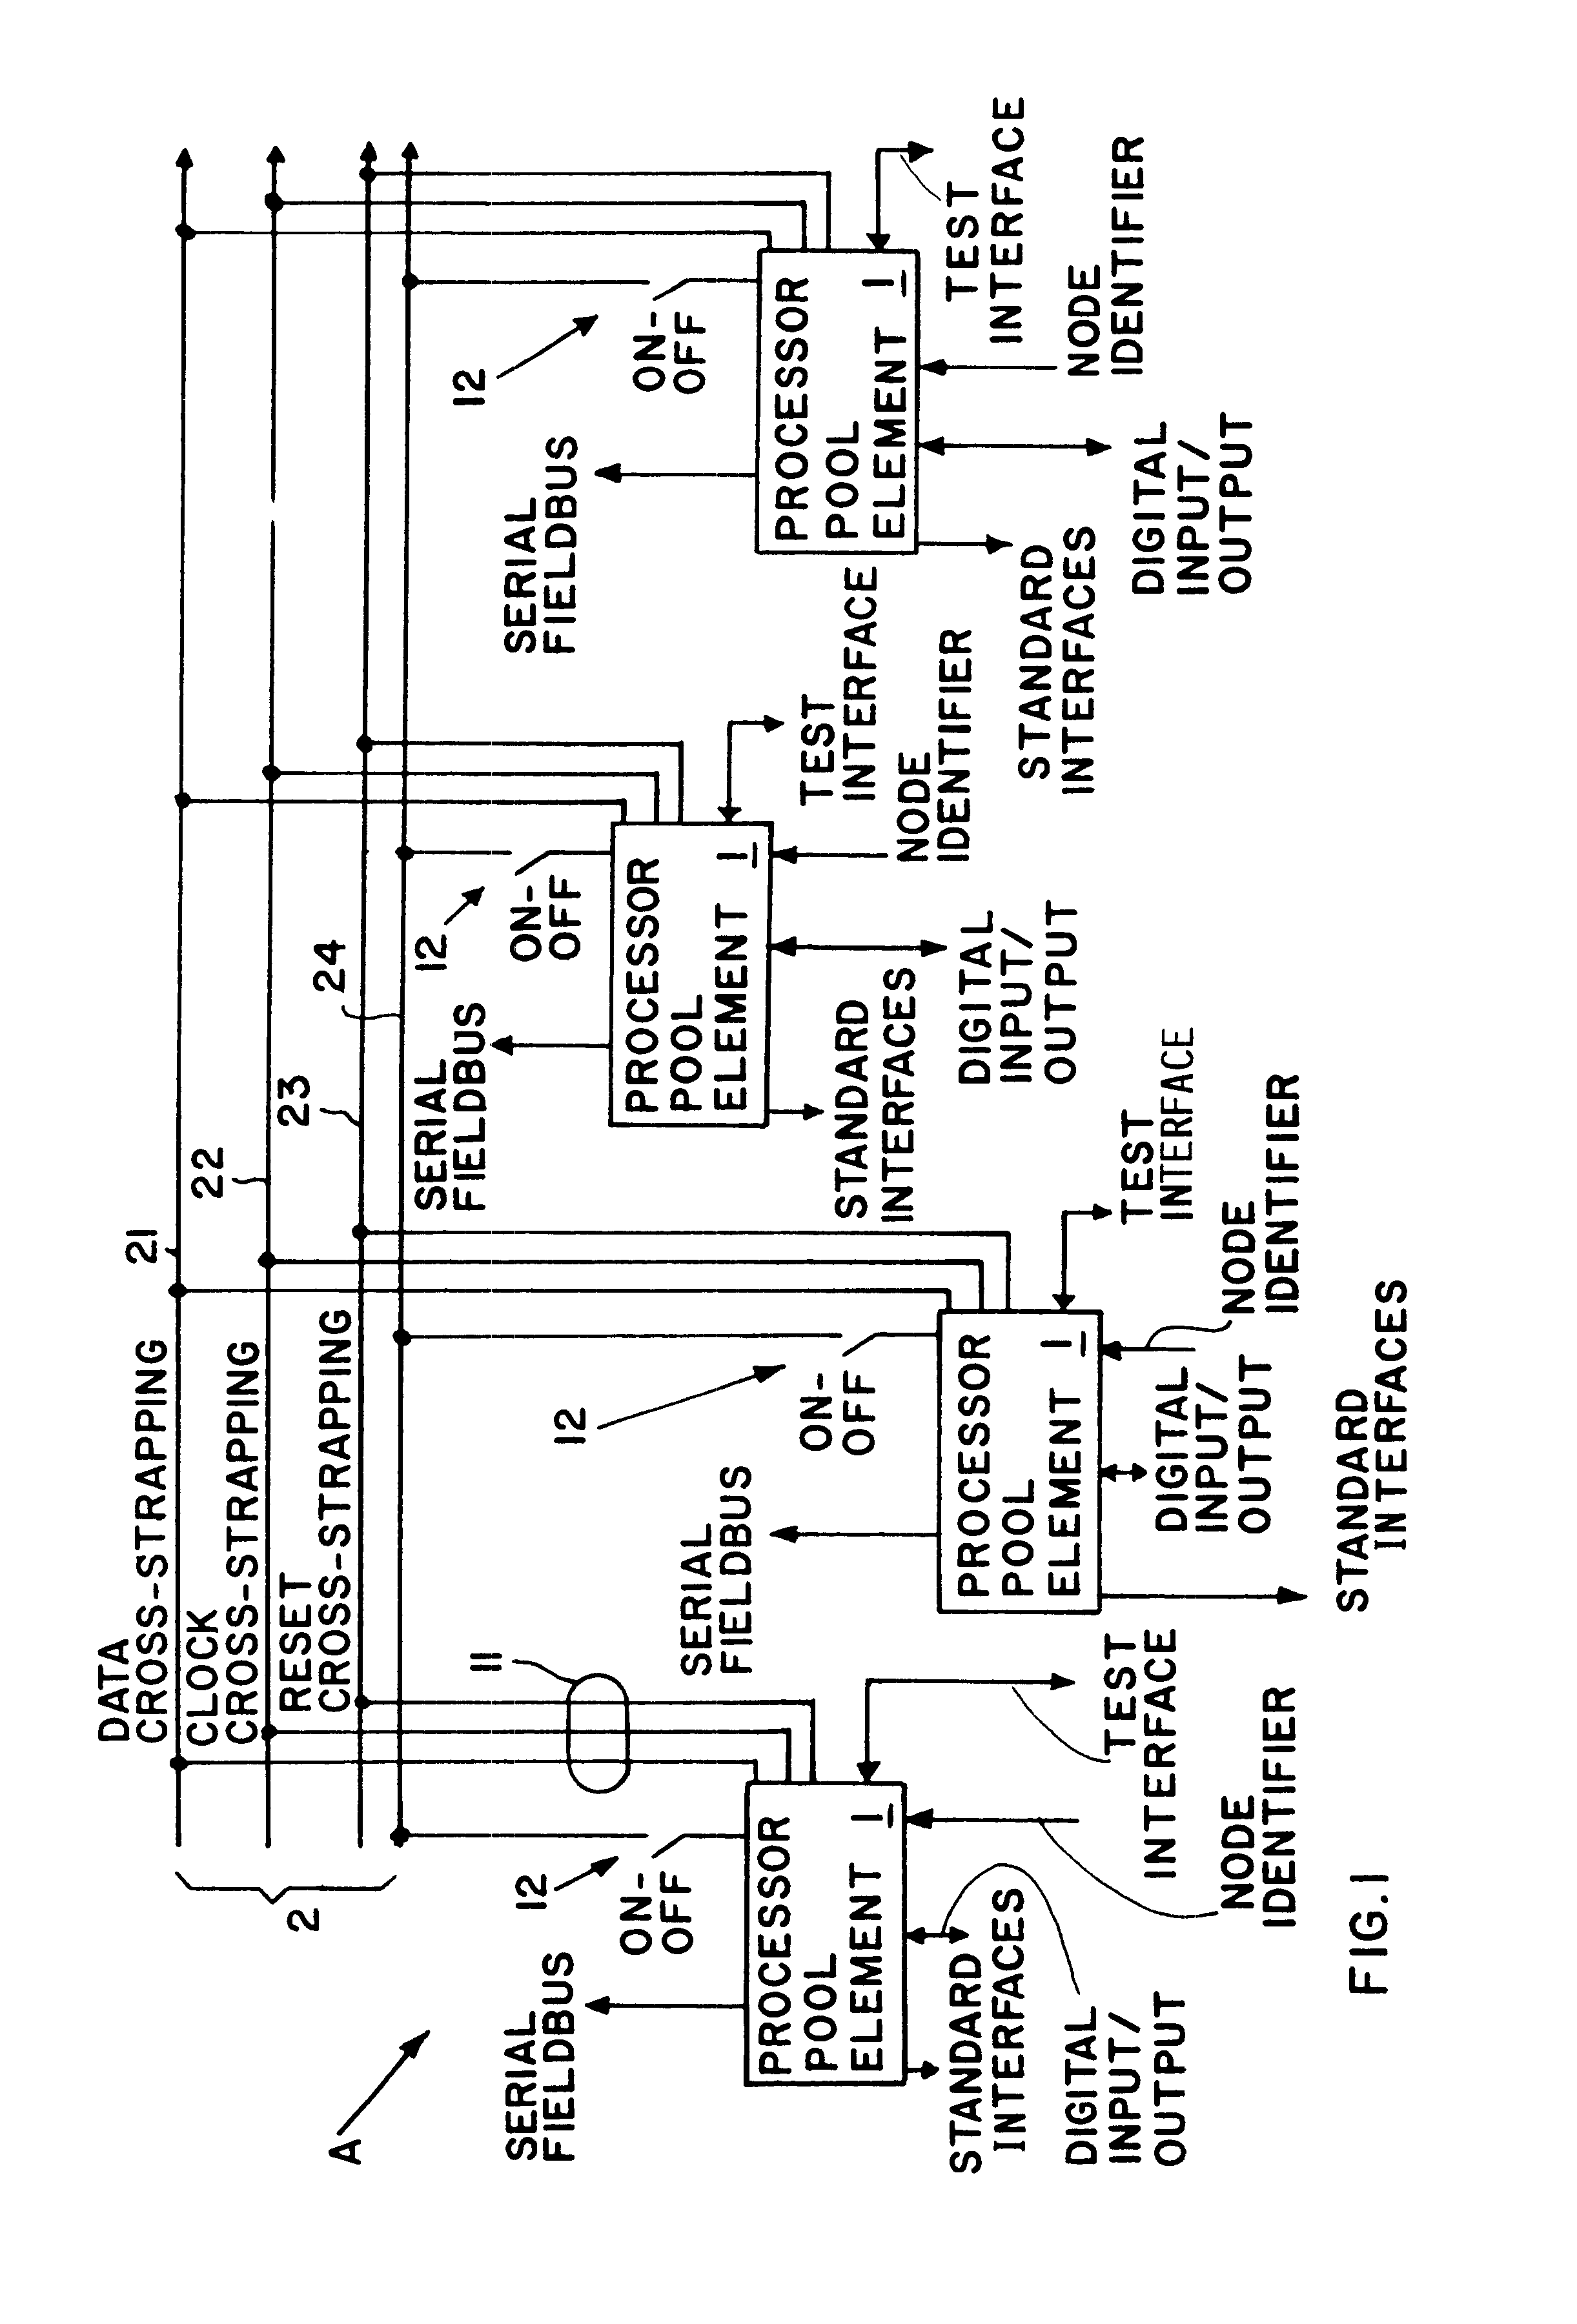 Method and apparatus for fault tolerant execution of computer programs